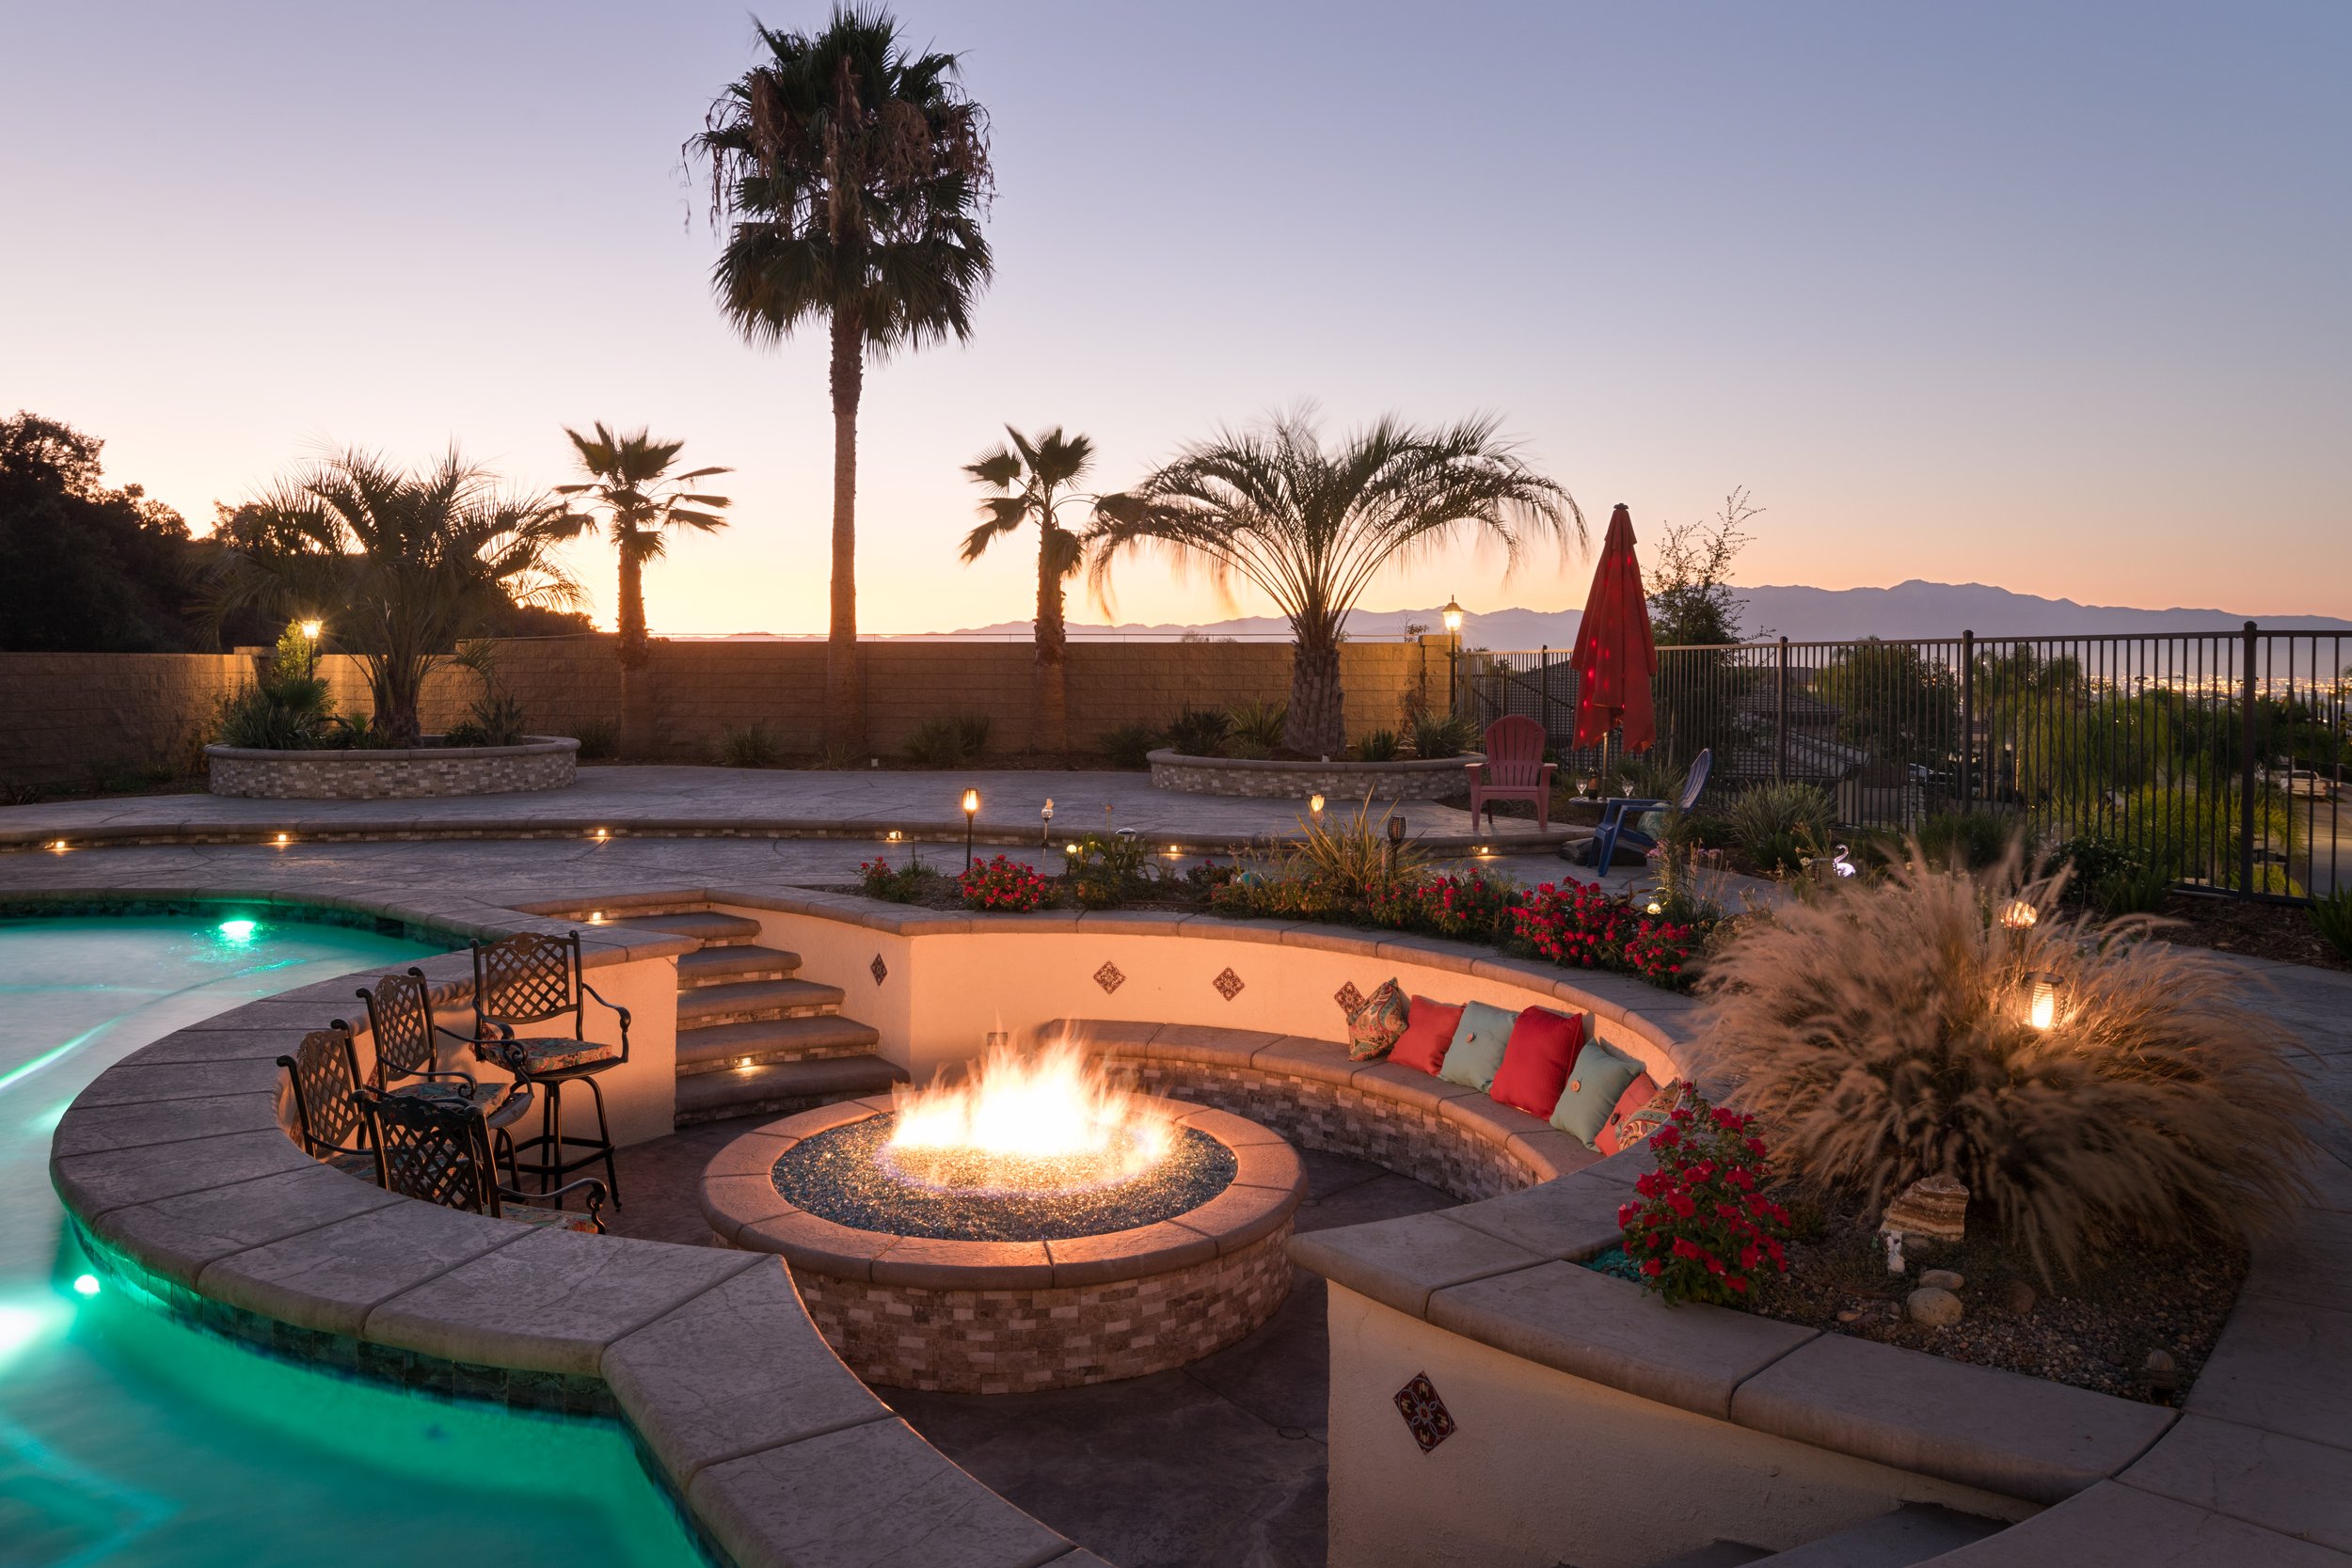 Twilight Photo of a Corona Listing by Beautiful Listings - Real Estate Photography and Videography